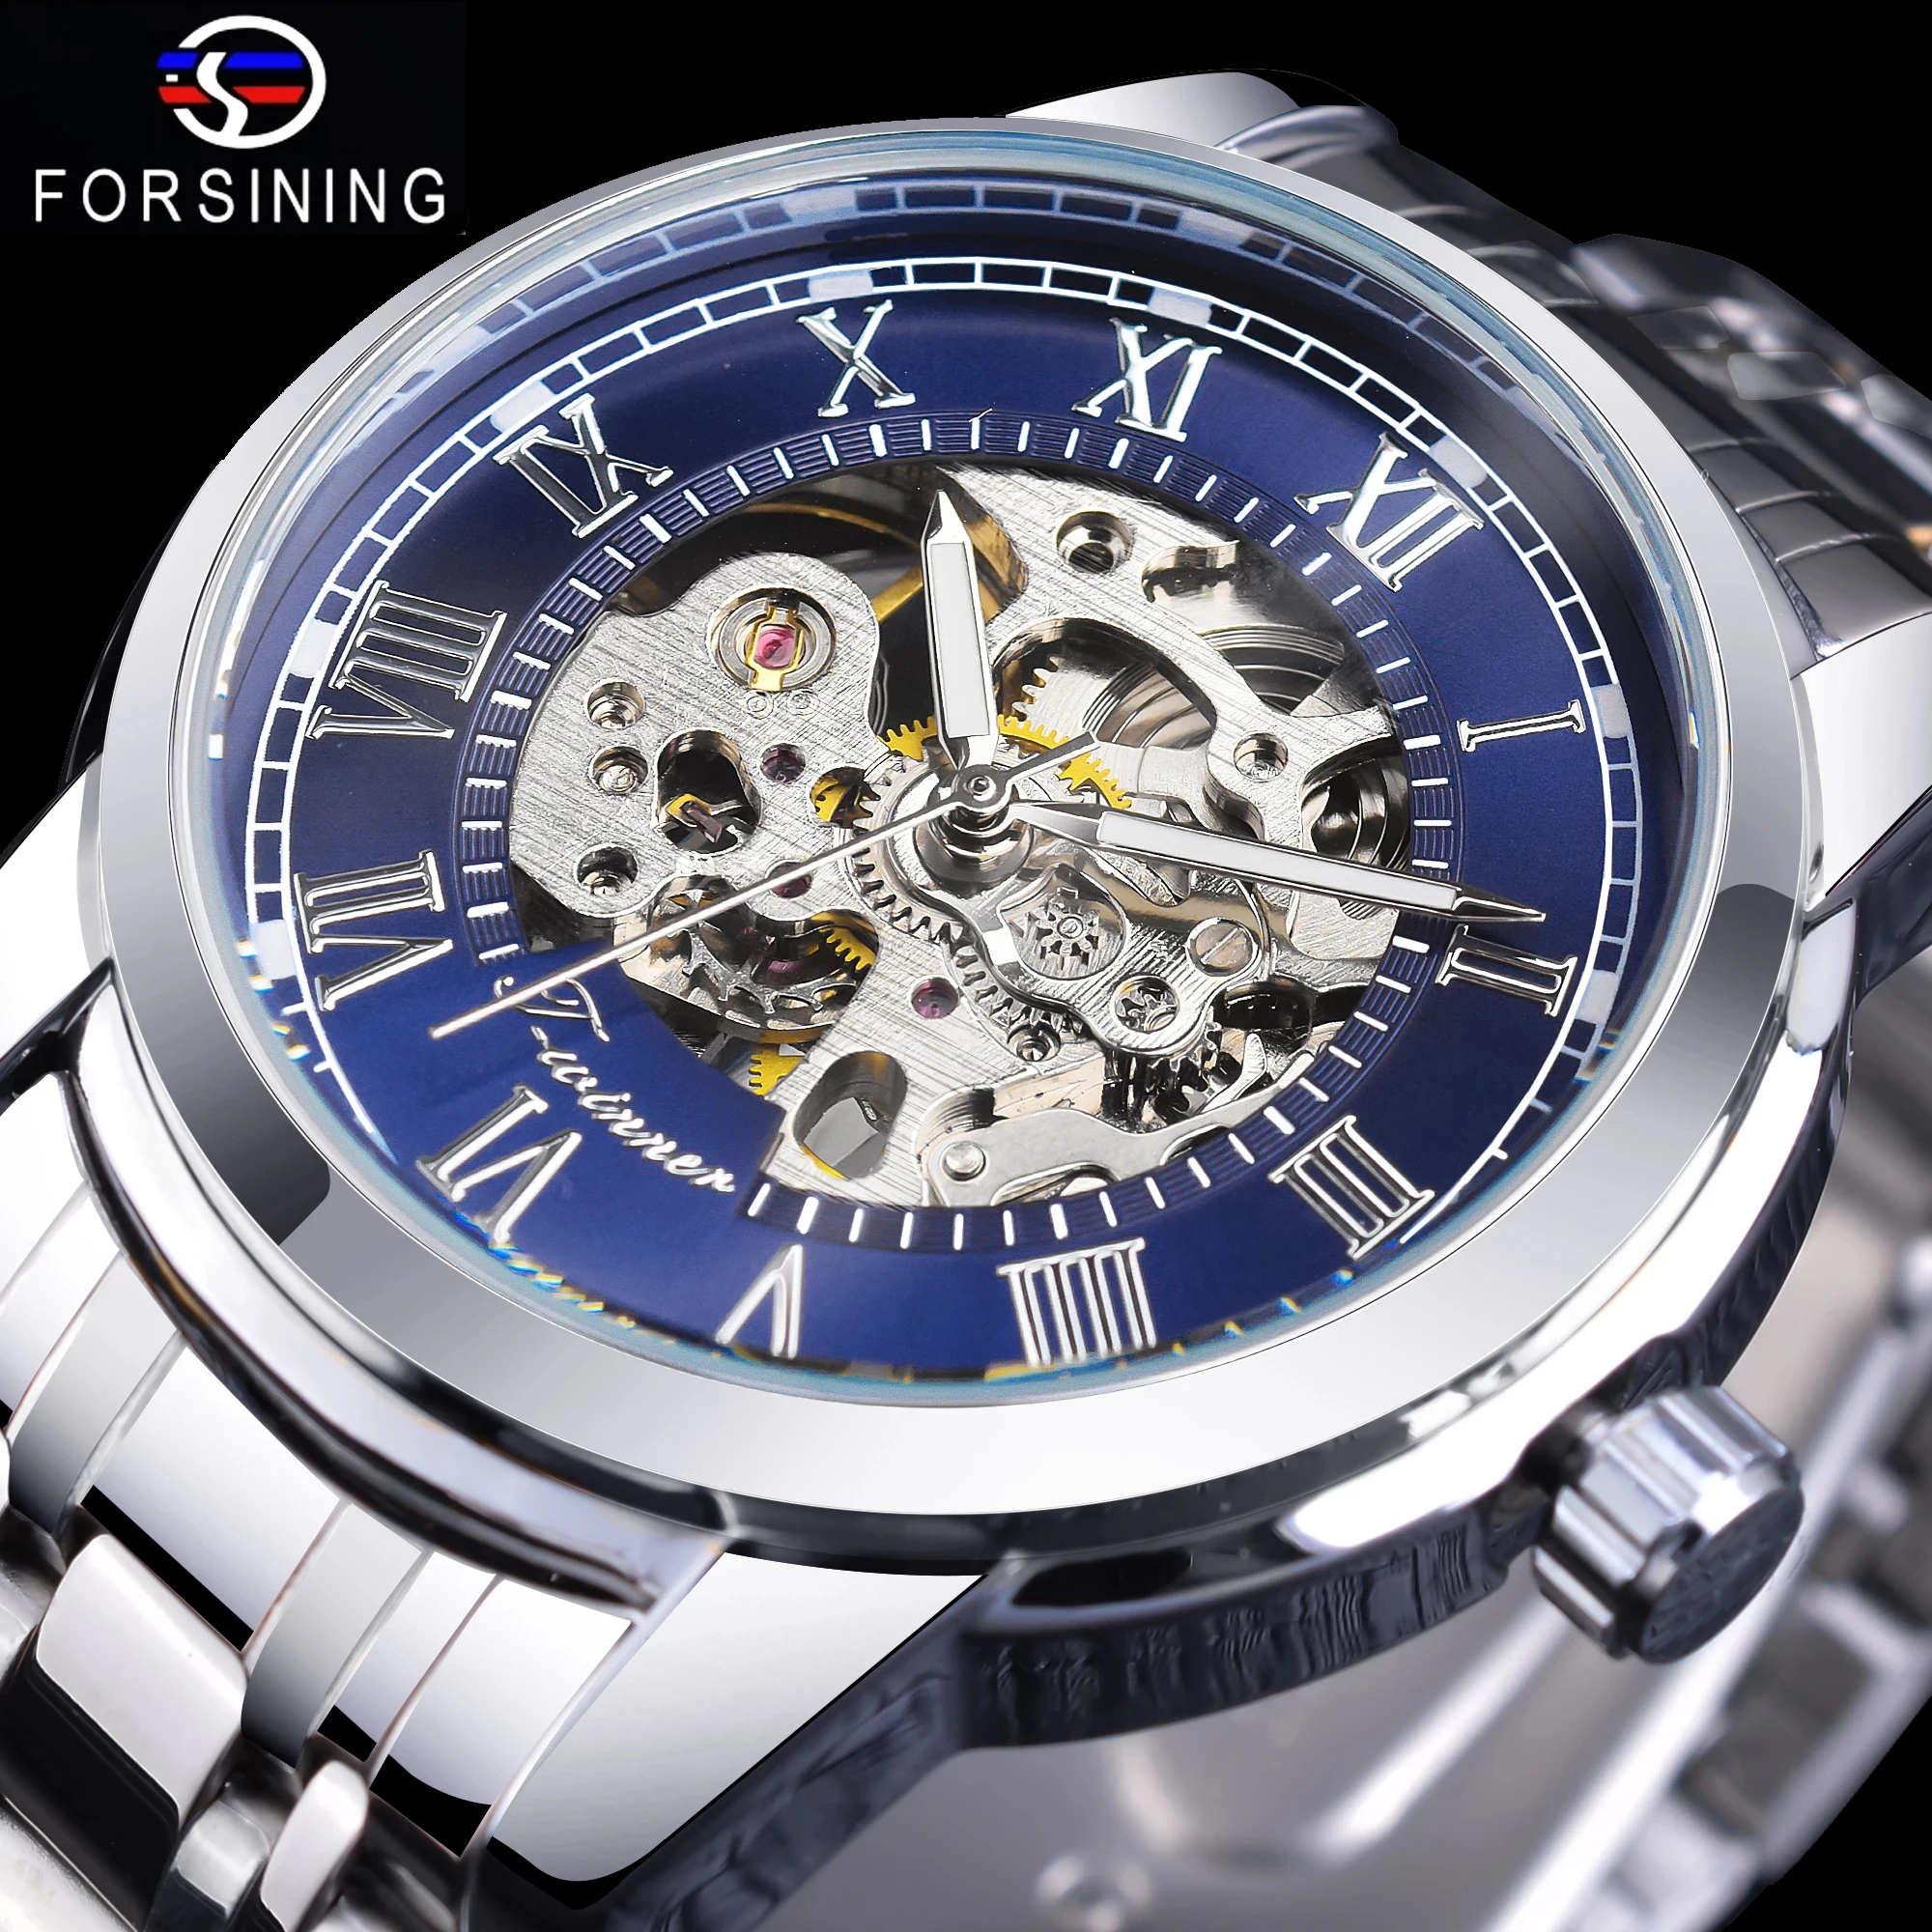 Forsining Hollow Open Work Blue Dial Silver Stainless Steel Waterproof Retro 3D Skeleton Automatic Mechanical Wrist Watch Clock traditional chinese desk calendar office tabletop standing planner desktop decor business office work clock calendar